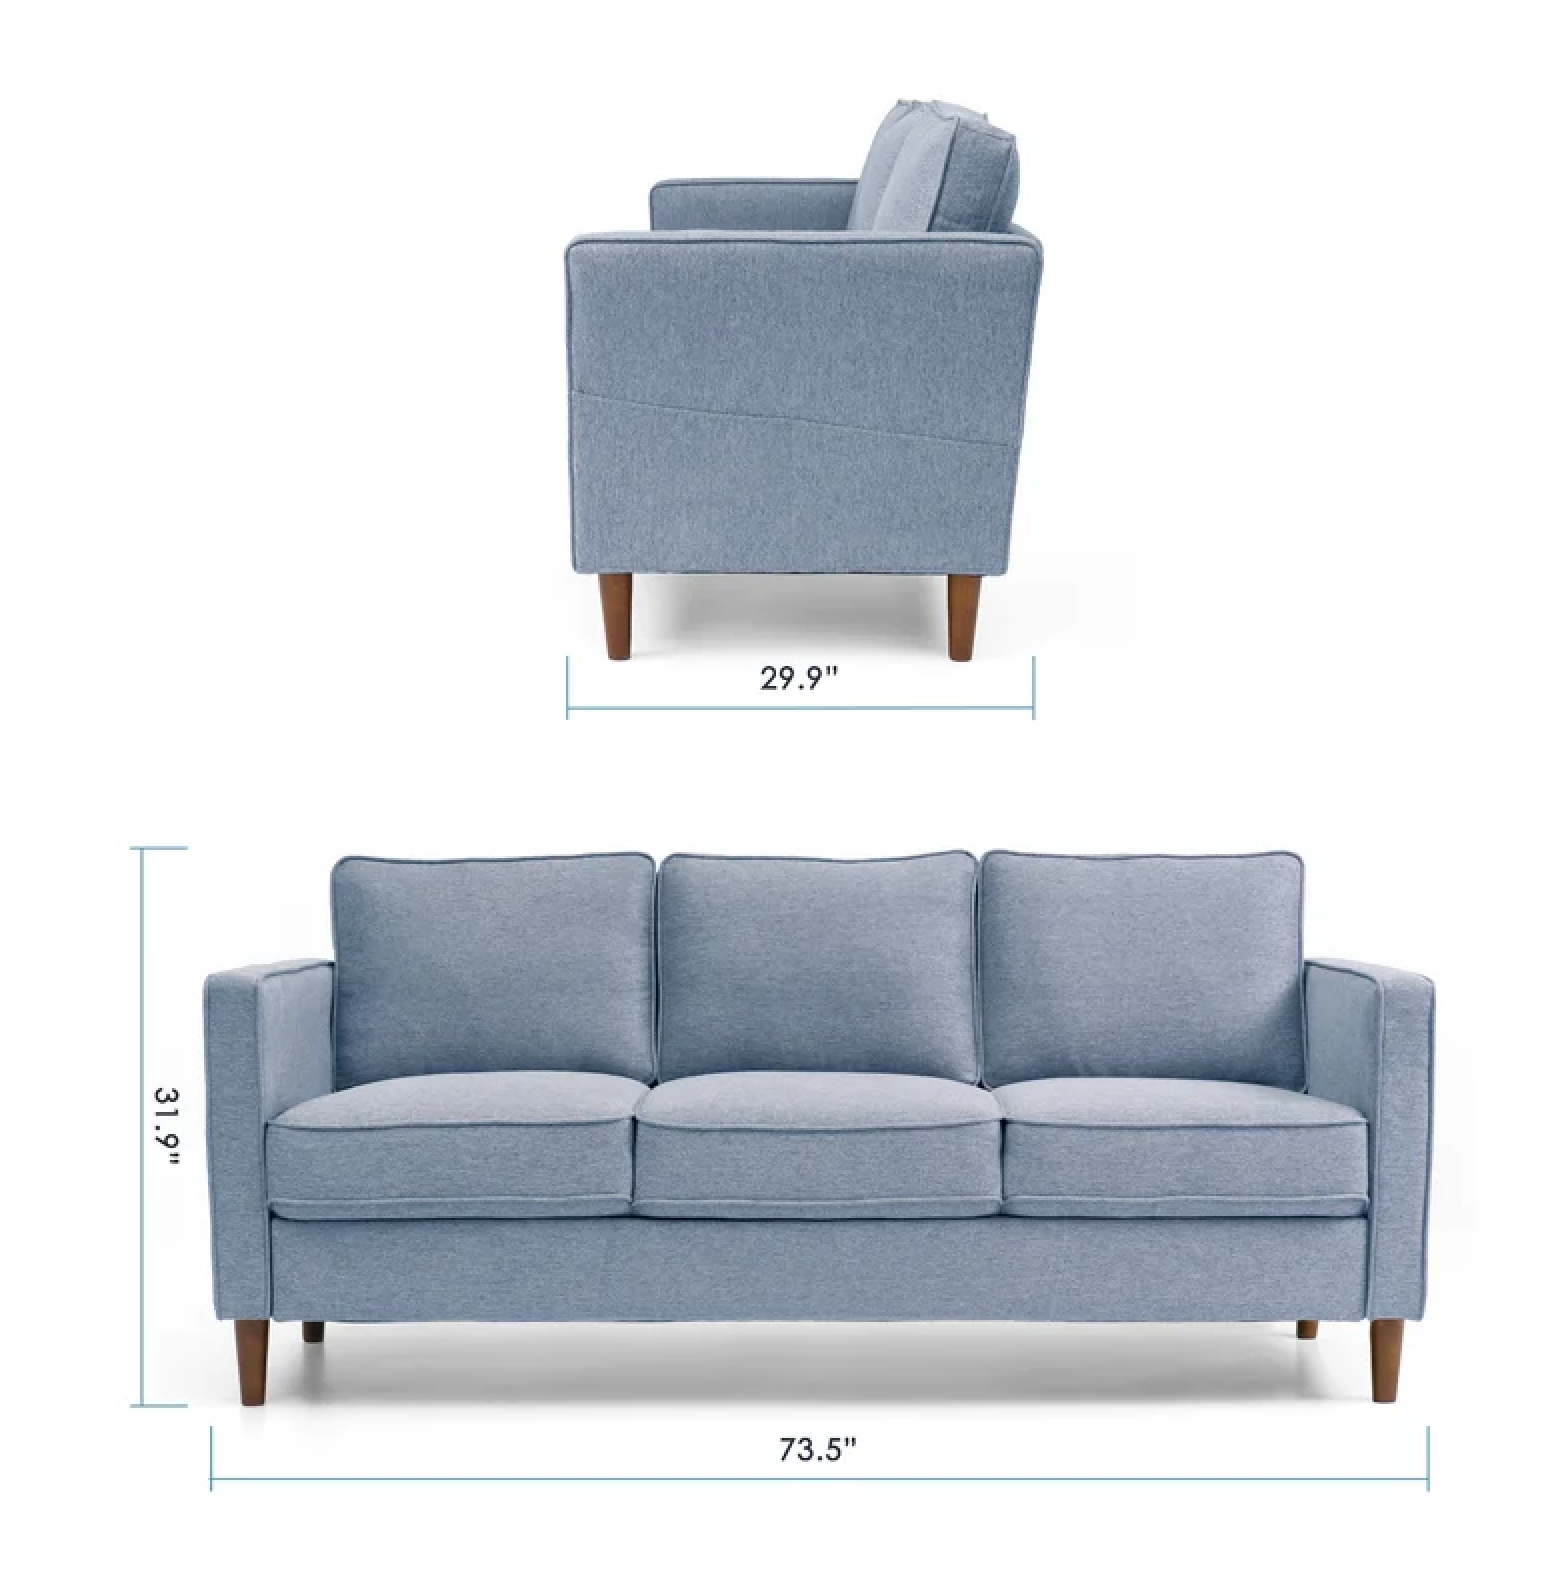 light blue sofa set 3 seater sofa small sofa bed modern sofa couch most comfortable couch